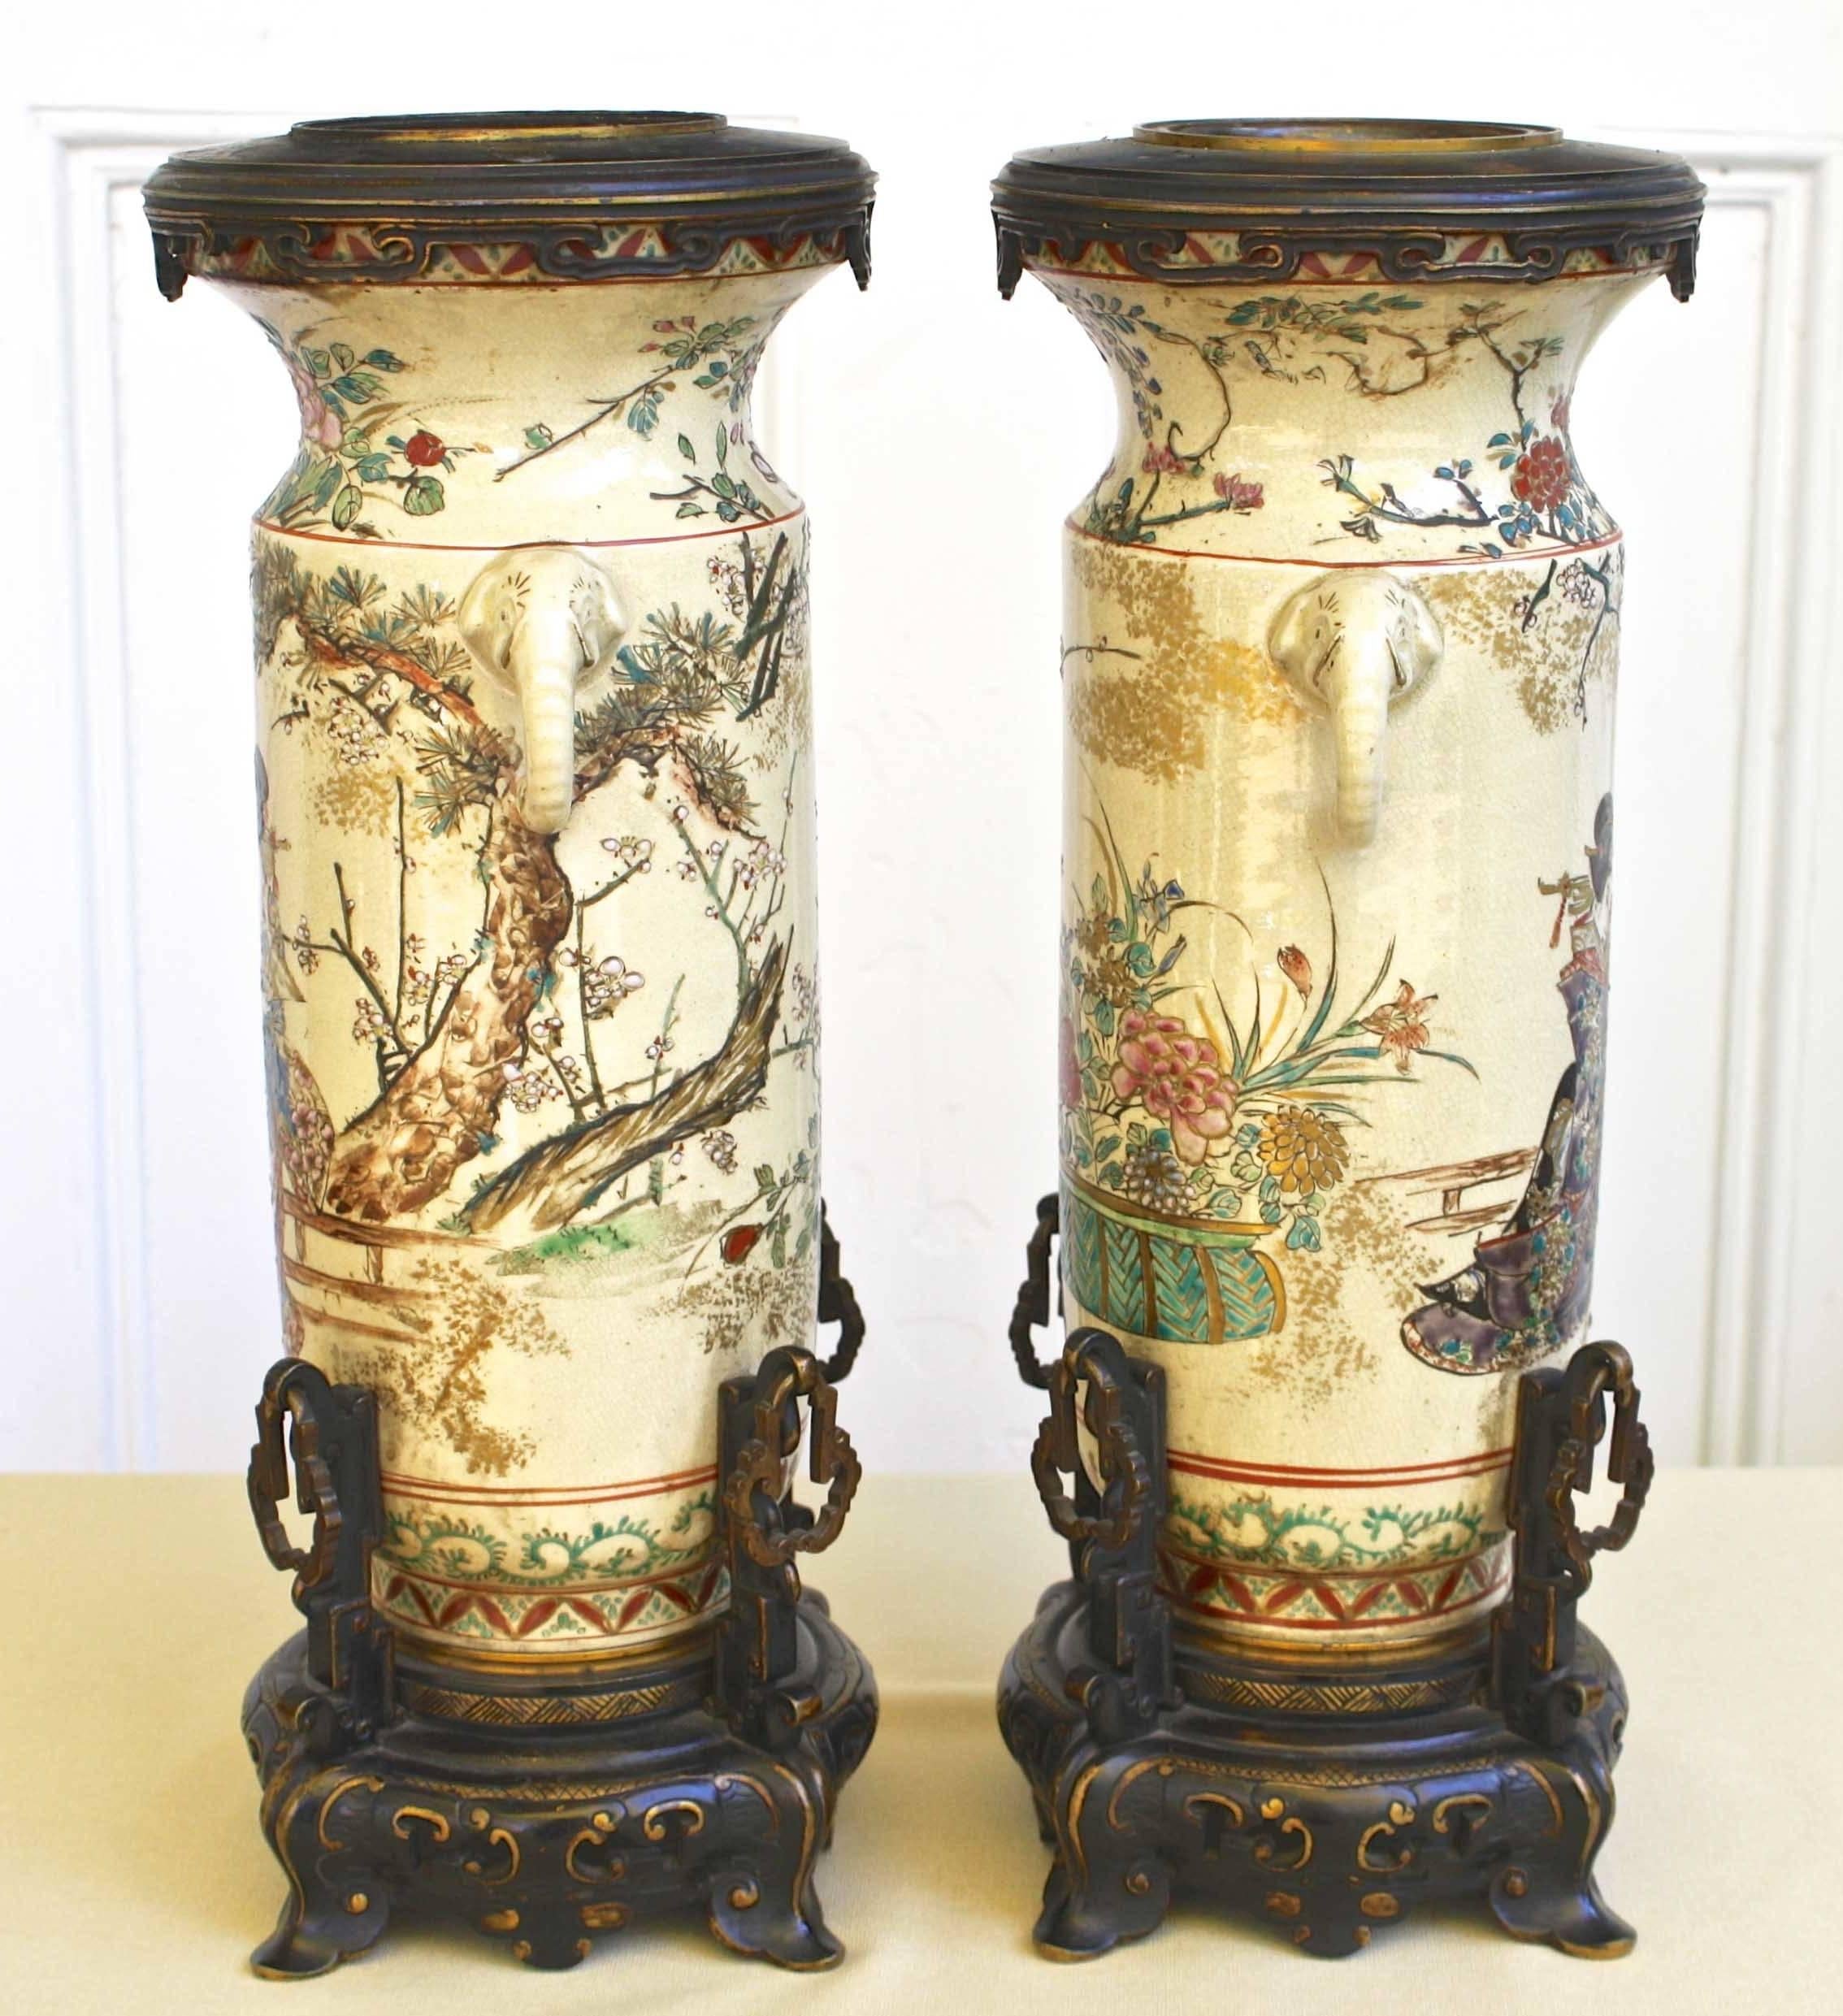 Meiji Period (1868-1912) from one of the finest Japanese makers for export to the European market; a pair of bronze-mounted intricately hand-painted earthenware vases.  As shown in Image #9, each contains an interior metal European marker: 